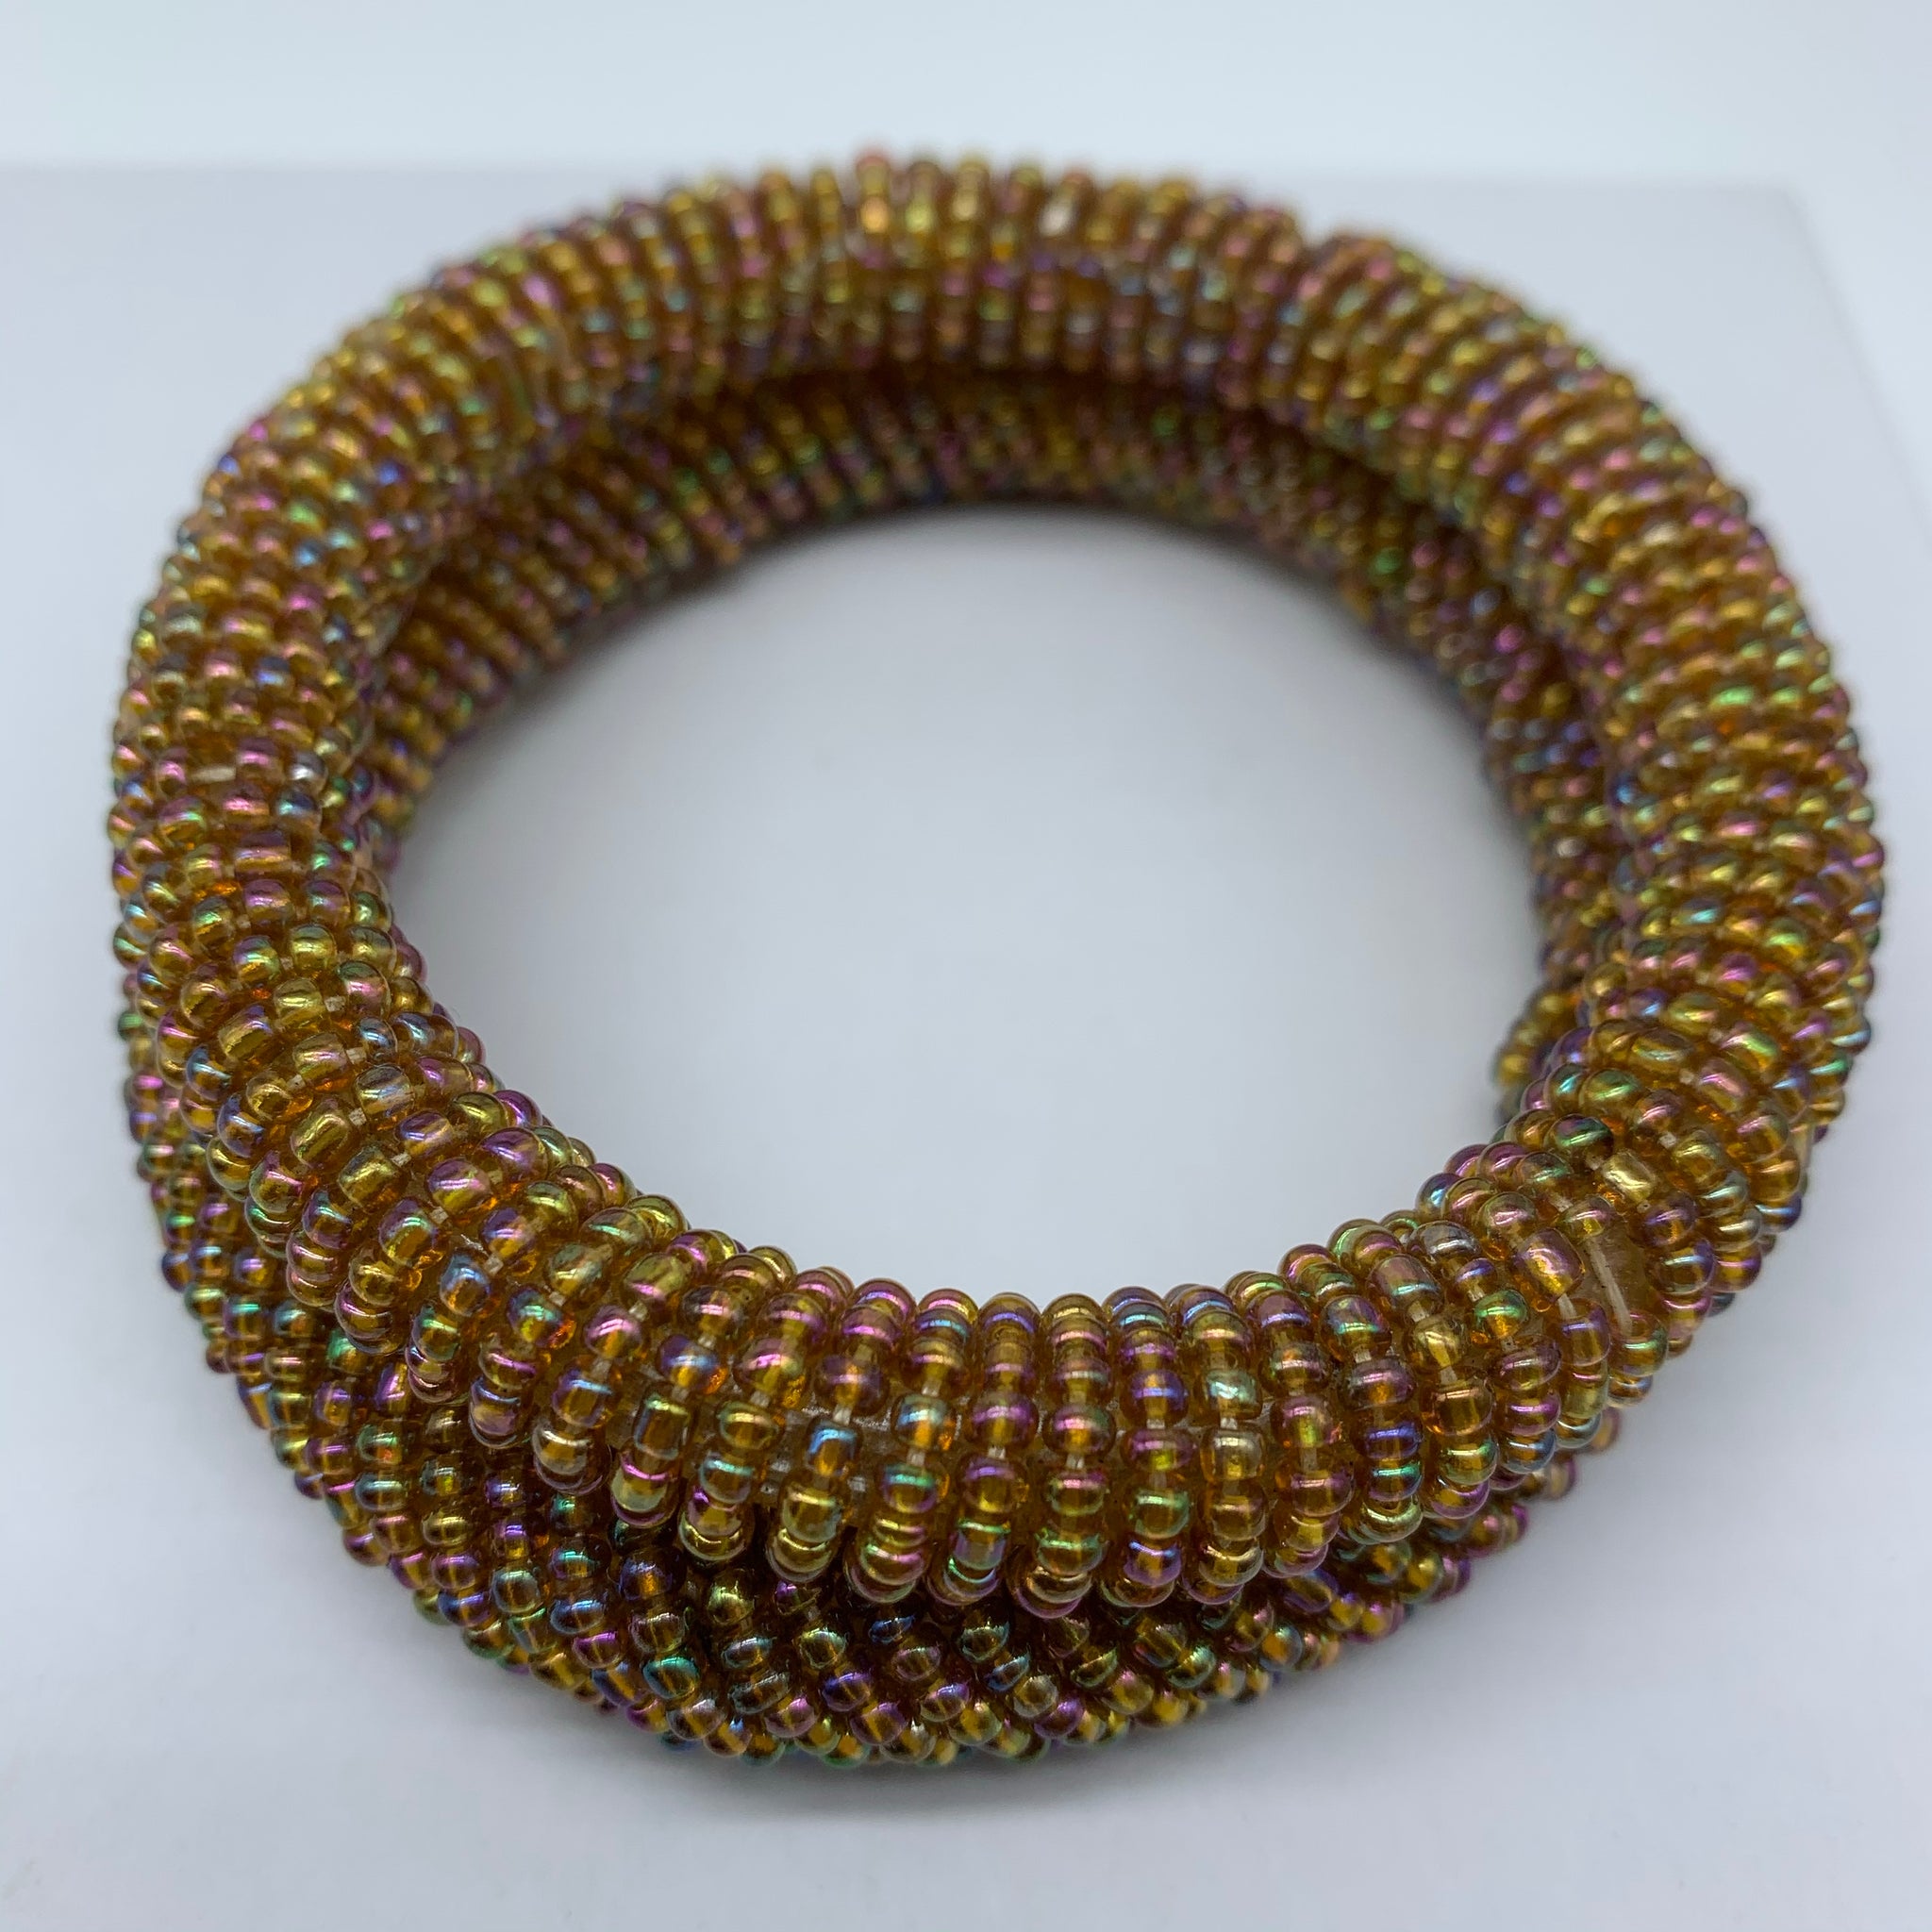 Beaded Bangle-Gold and Mutli Colour Variation - Lillon Boutique